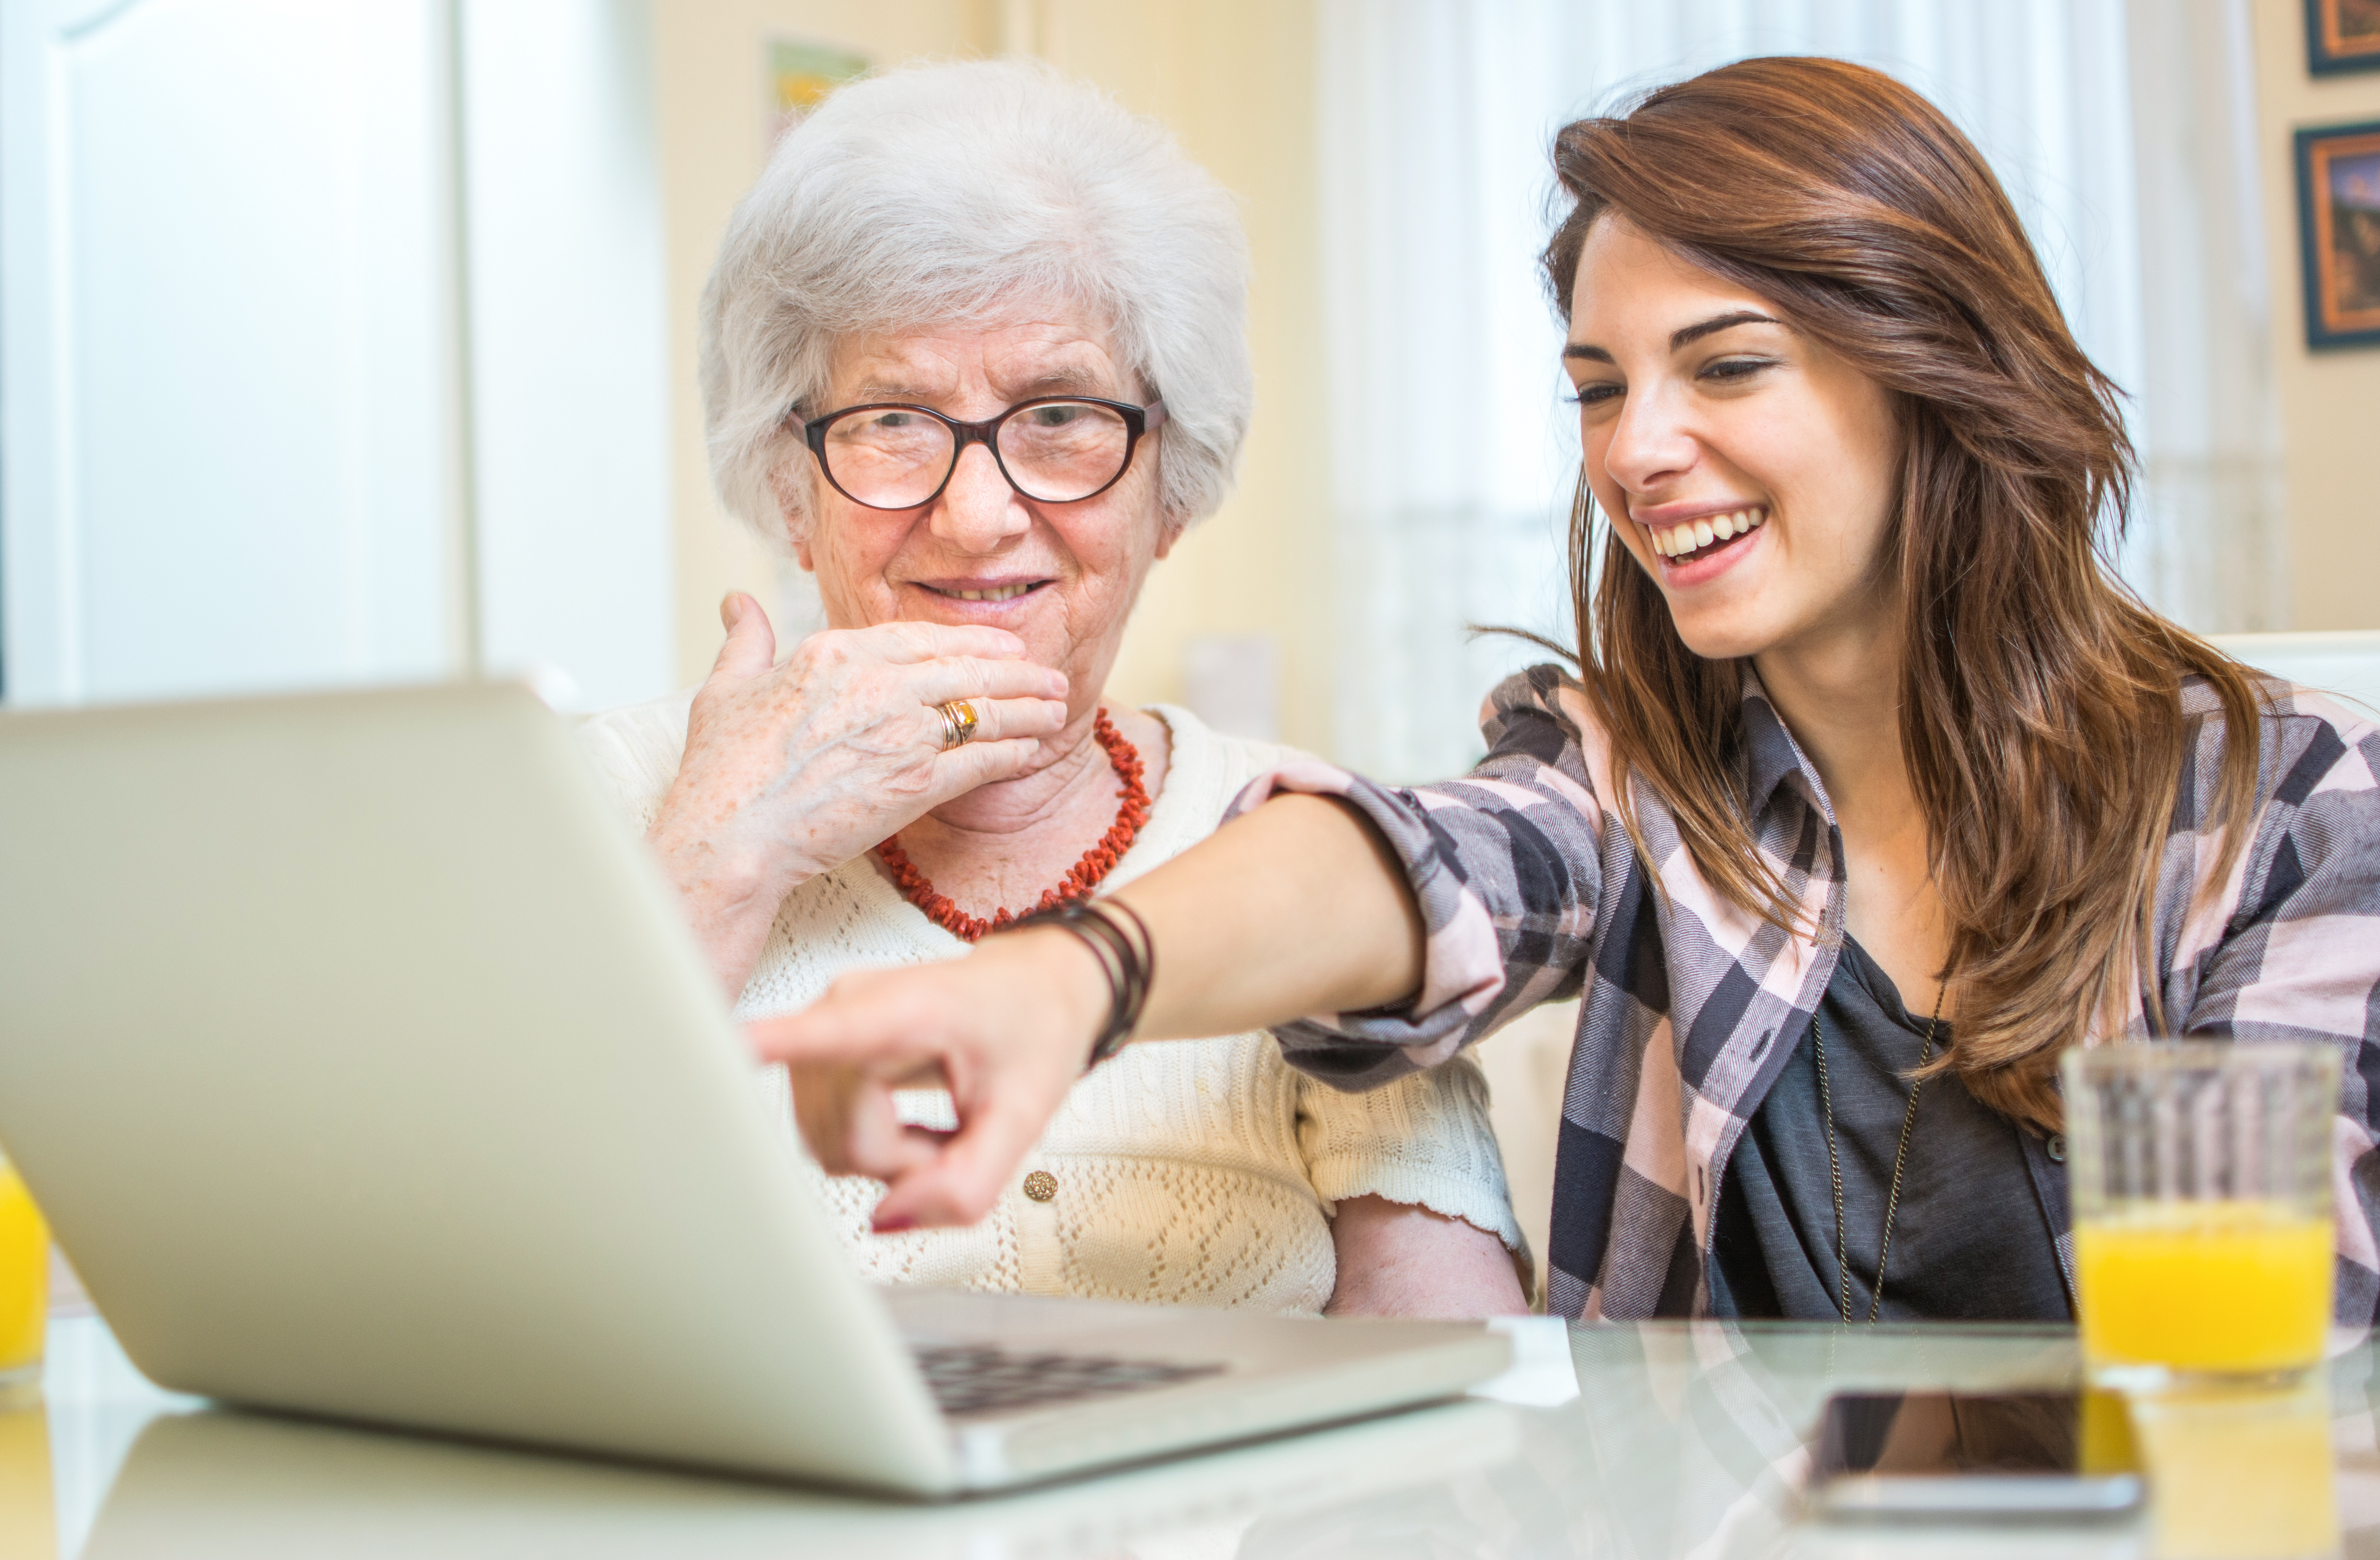 A young woman points at an open laptop to show an older woman something on the screen